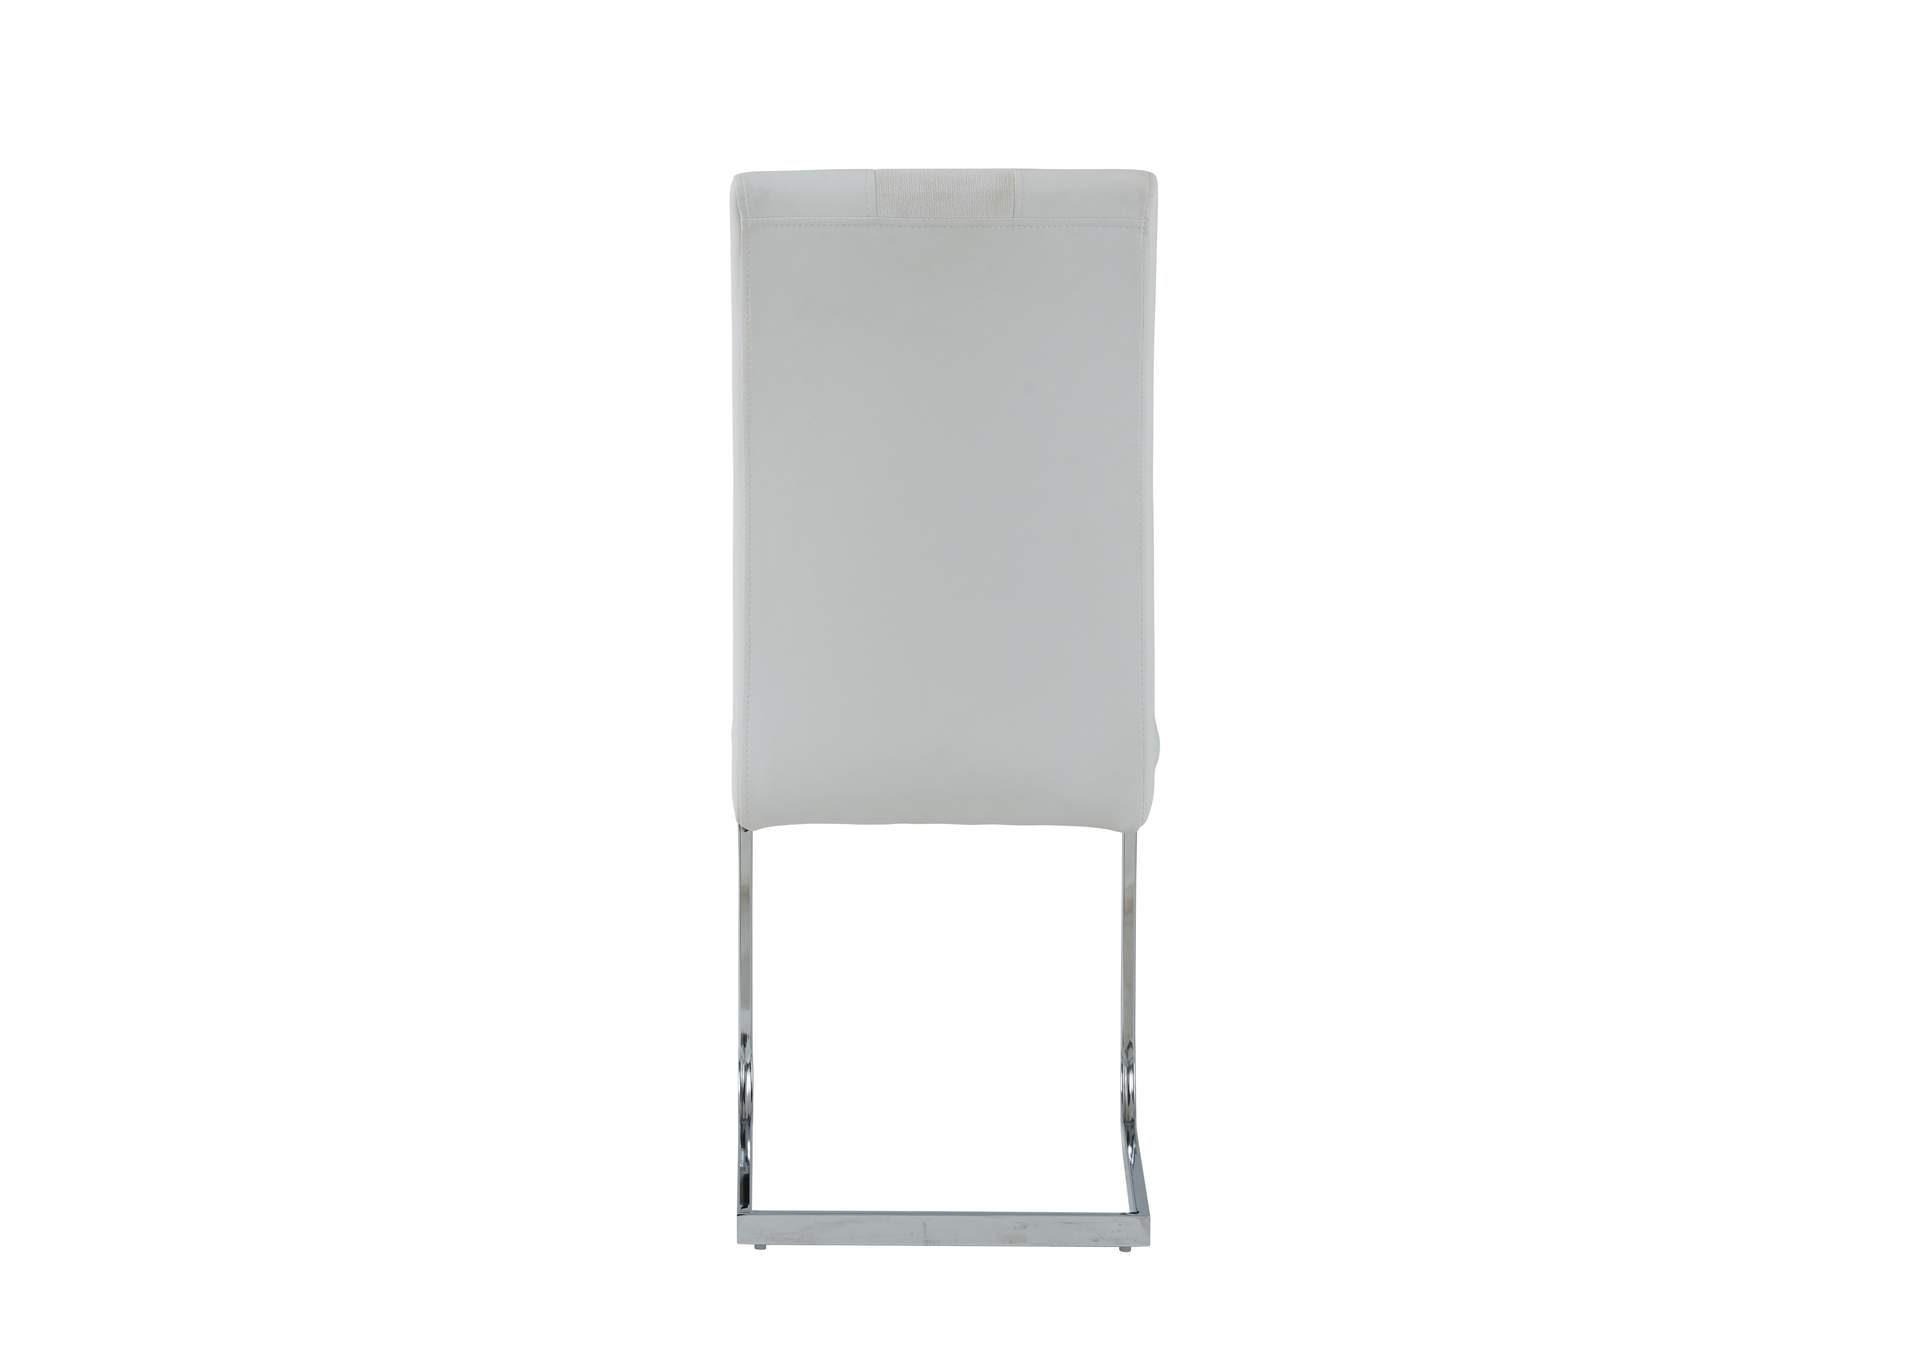 White Set Of 4 Dining Chairs,Global Furniture USA